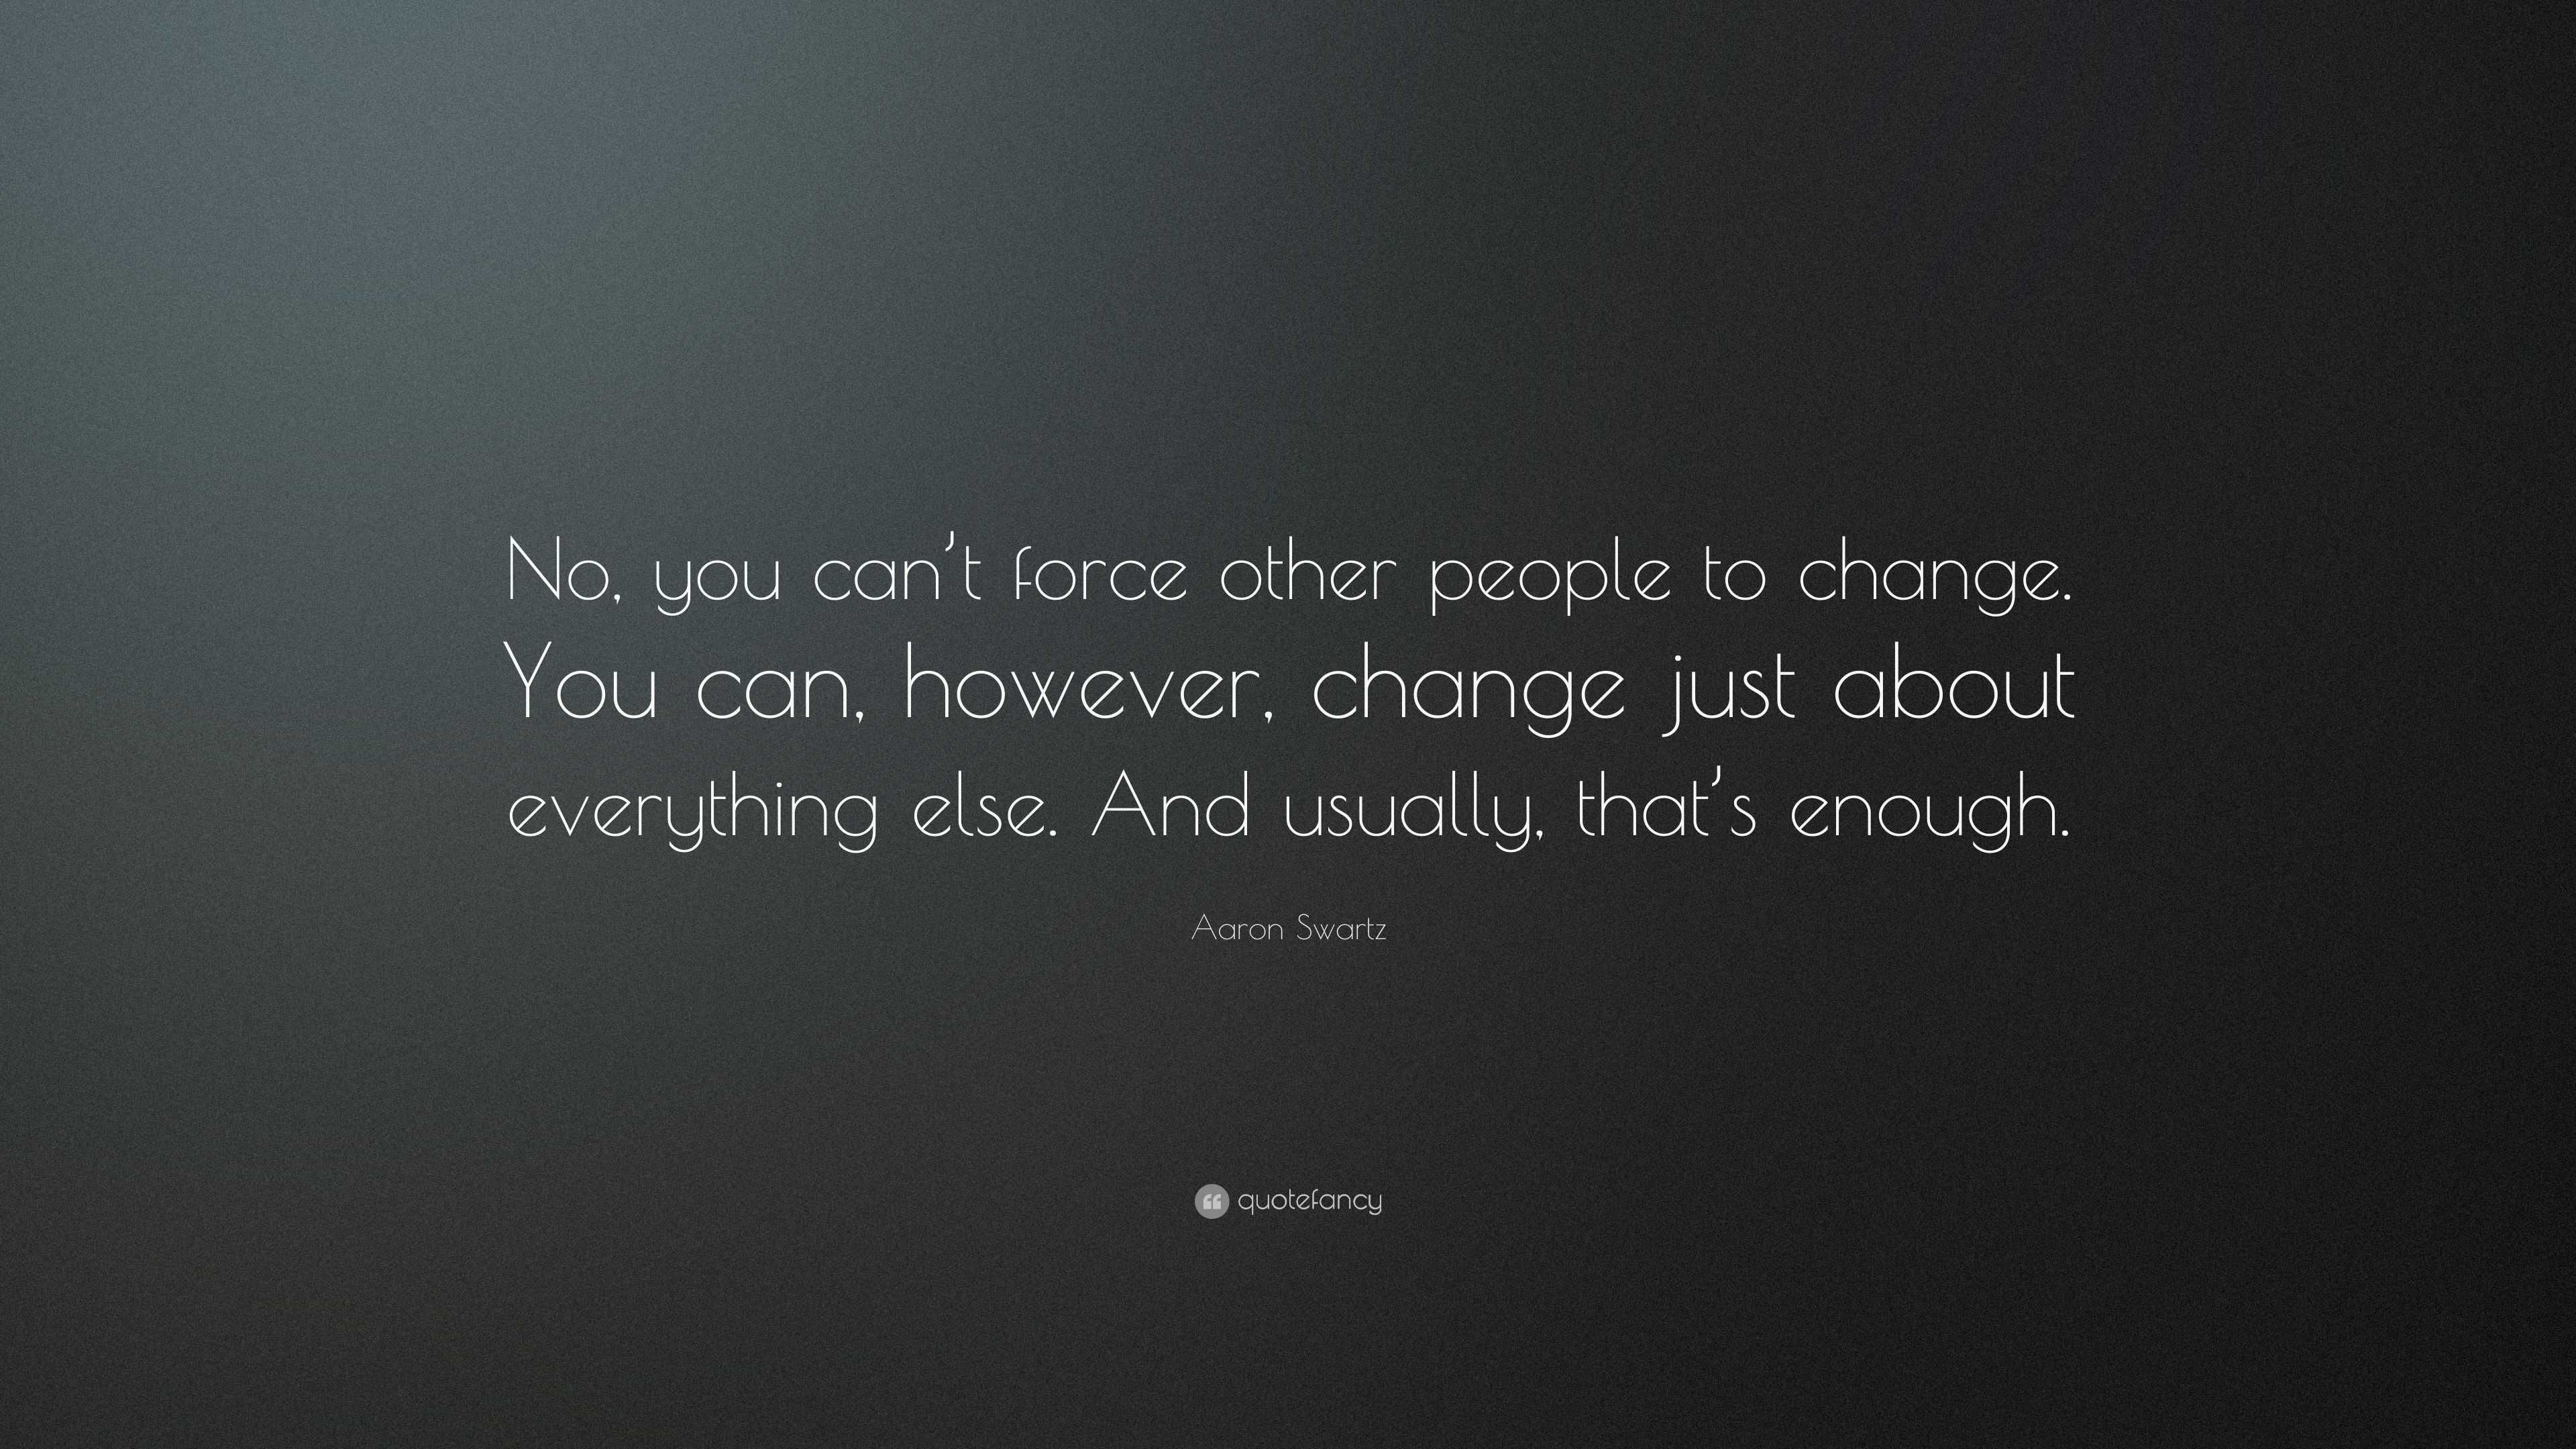 Aaron Swartz Quote: “No, you can’t force other people to change. You ...